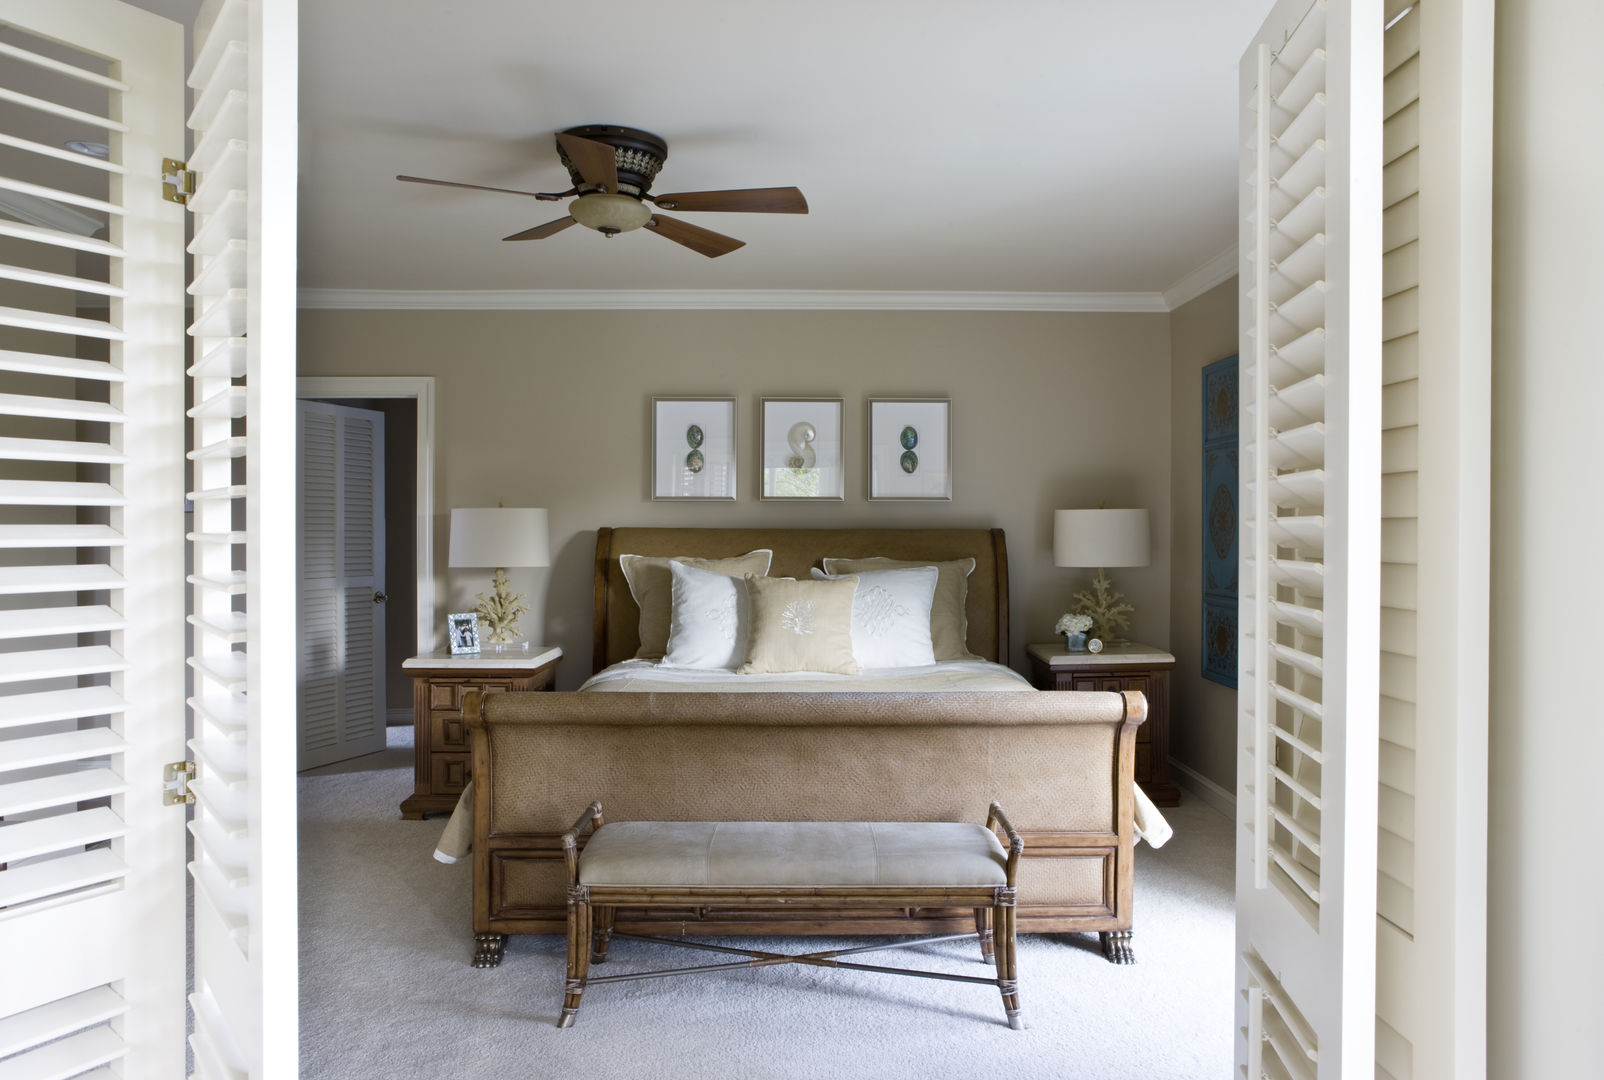 Caribbean Dream - Bedroom Lorna Gross Interior Design Tropical style bedroom teal,shells,caribbean,plantation shutters,woven headboard,ceiling fan,bench,coral,chic,sophisticated,beige